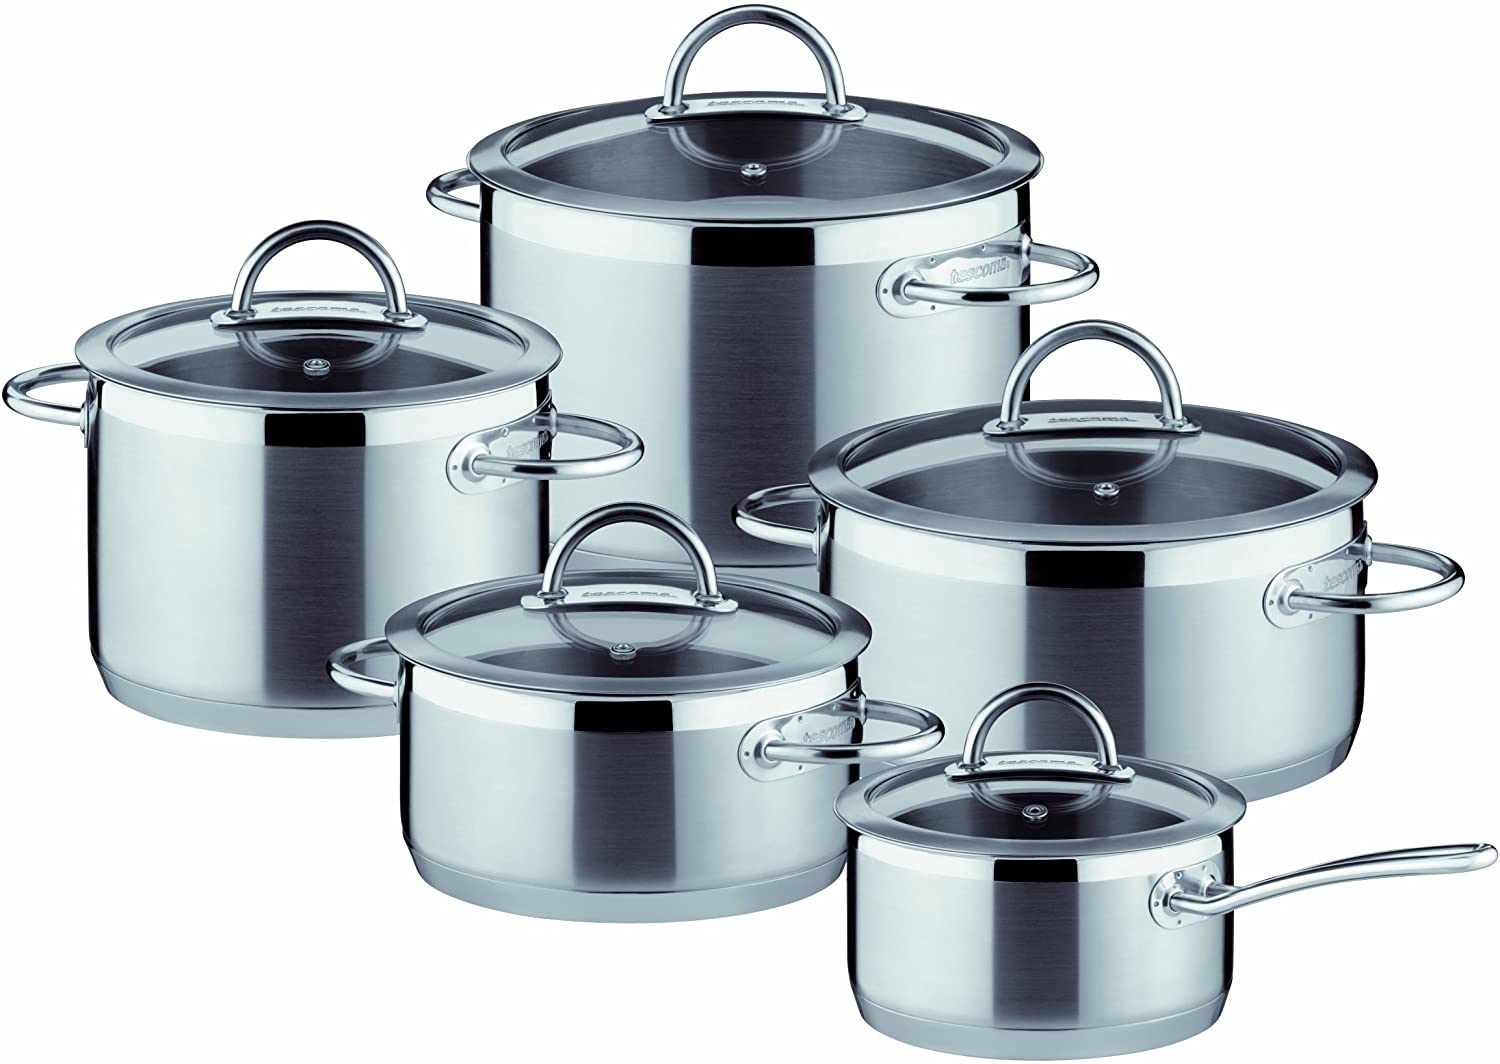 Tescoma Vision 10-Piece Stainless Steel Cookware Set